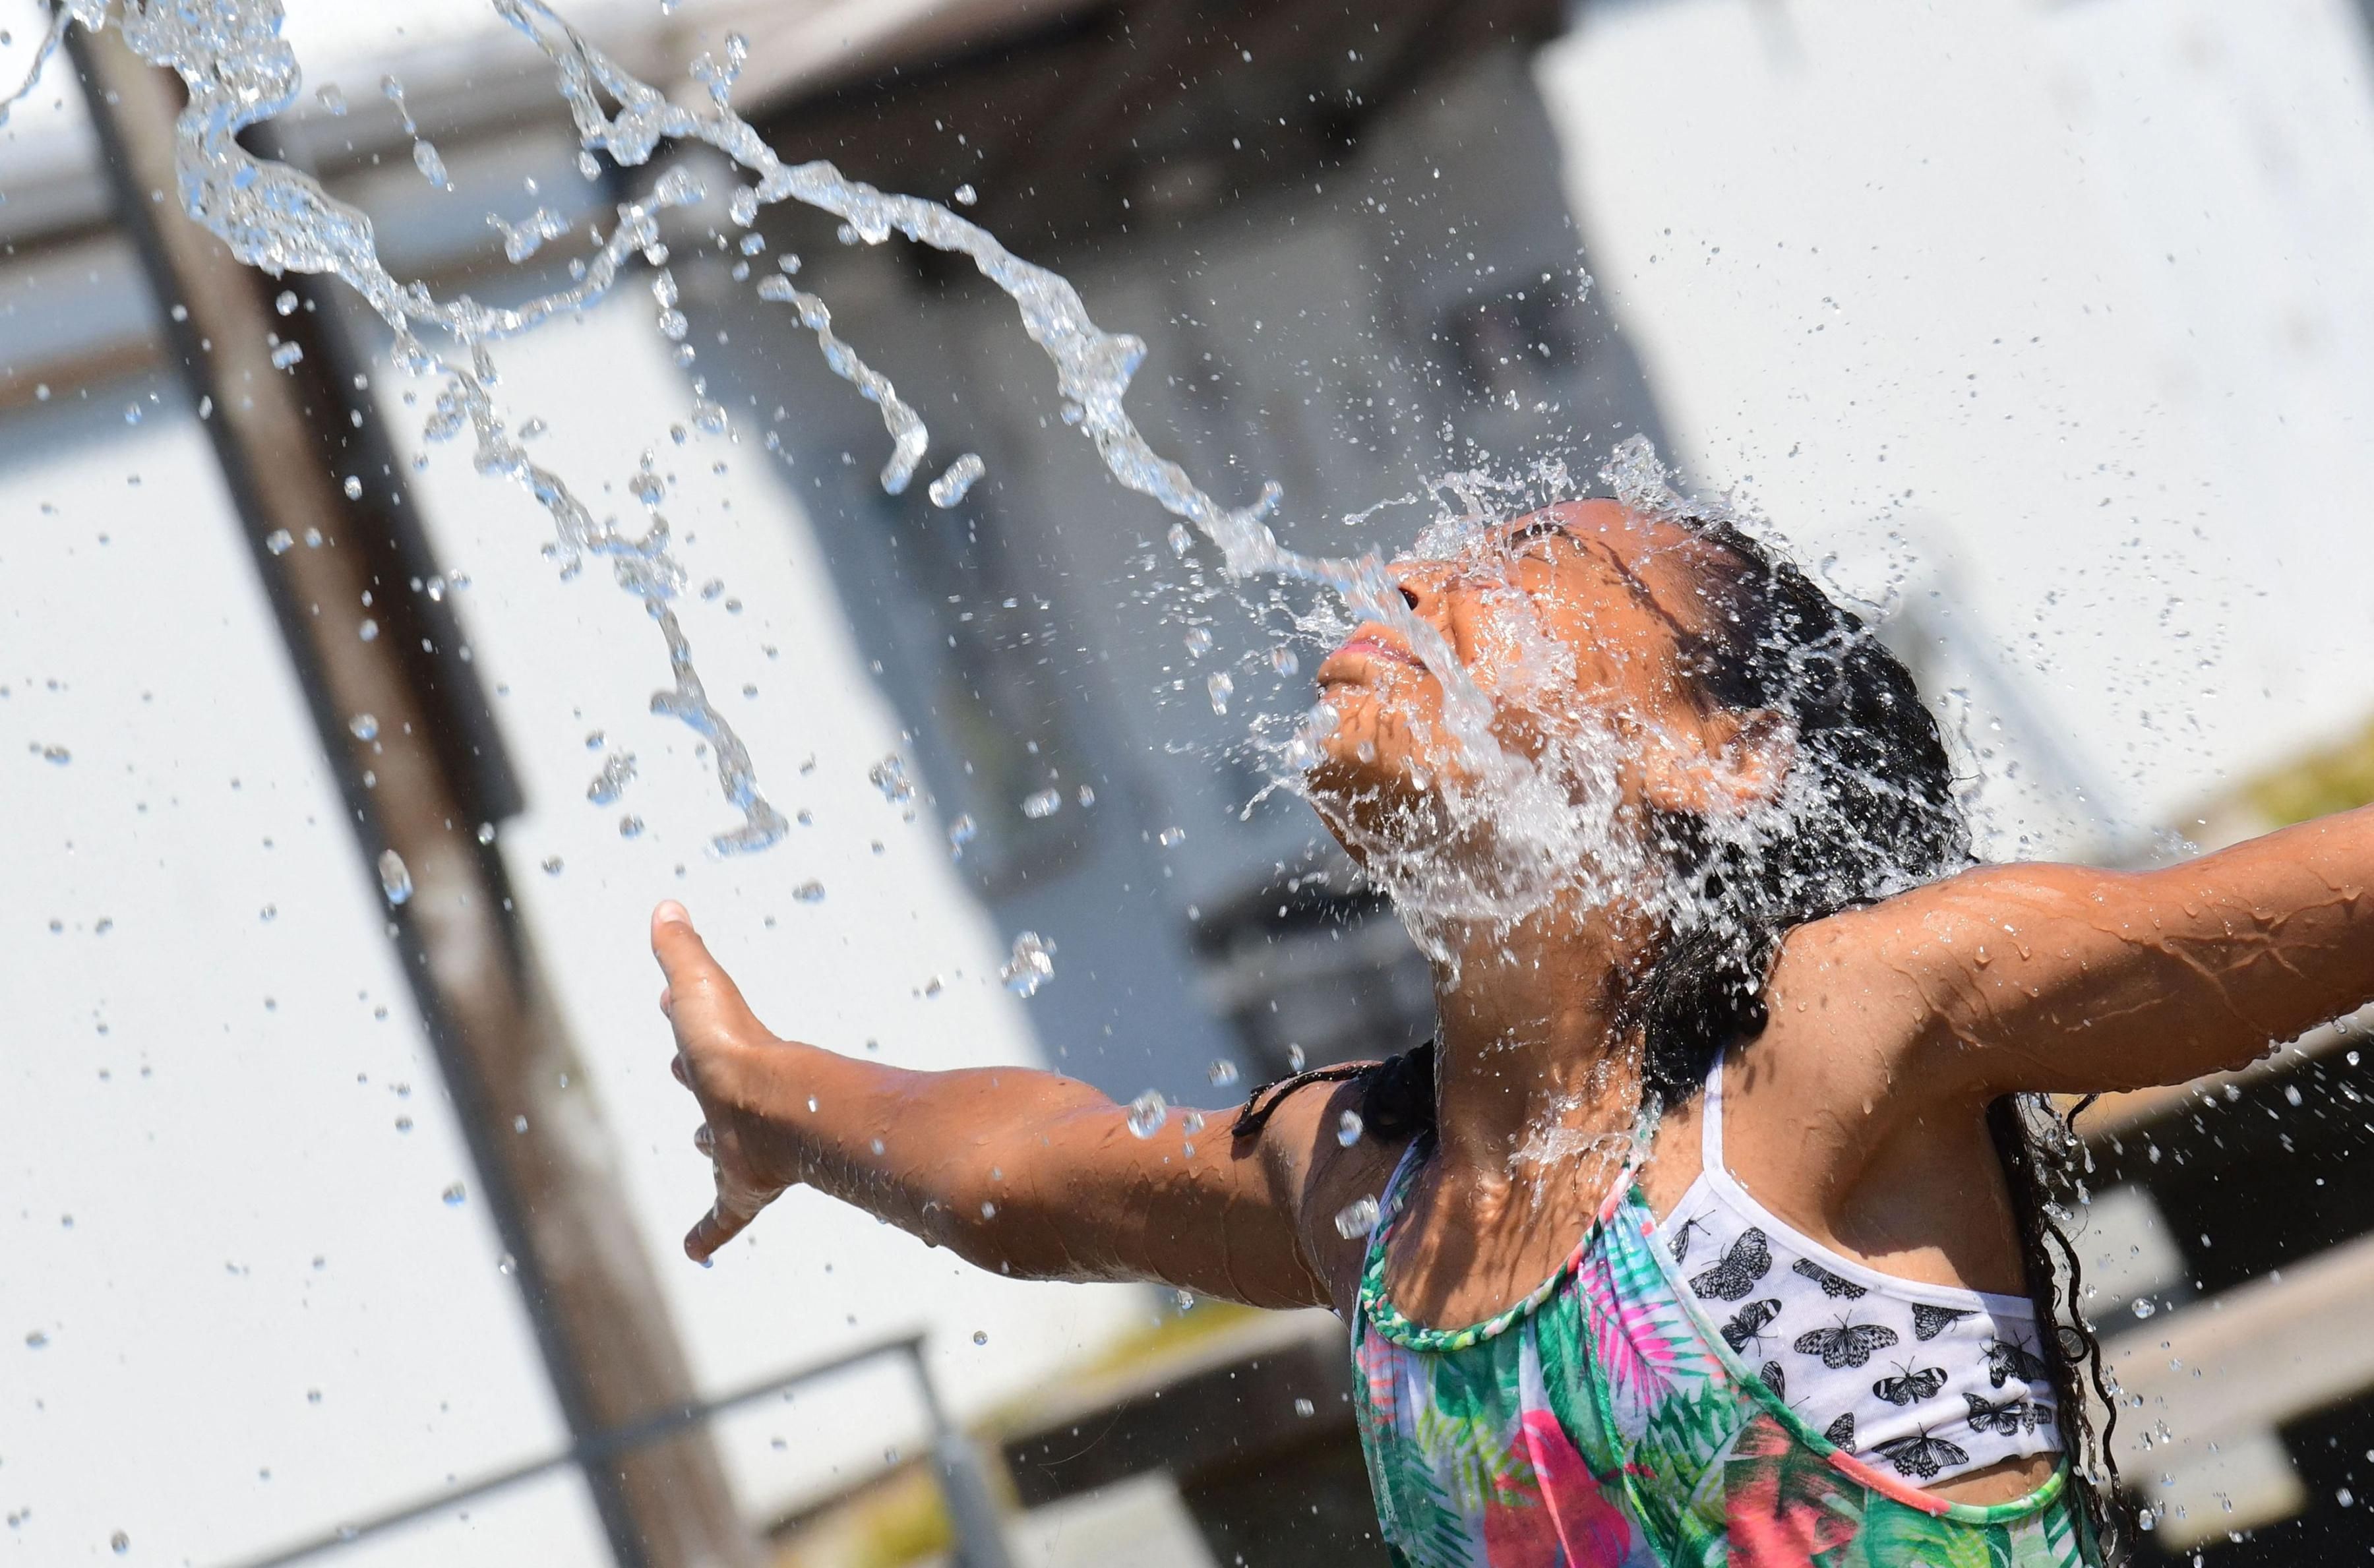 A child cools off at a community water park amid sweltering heat